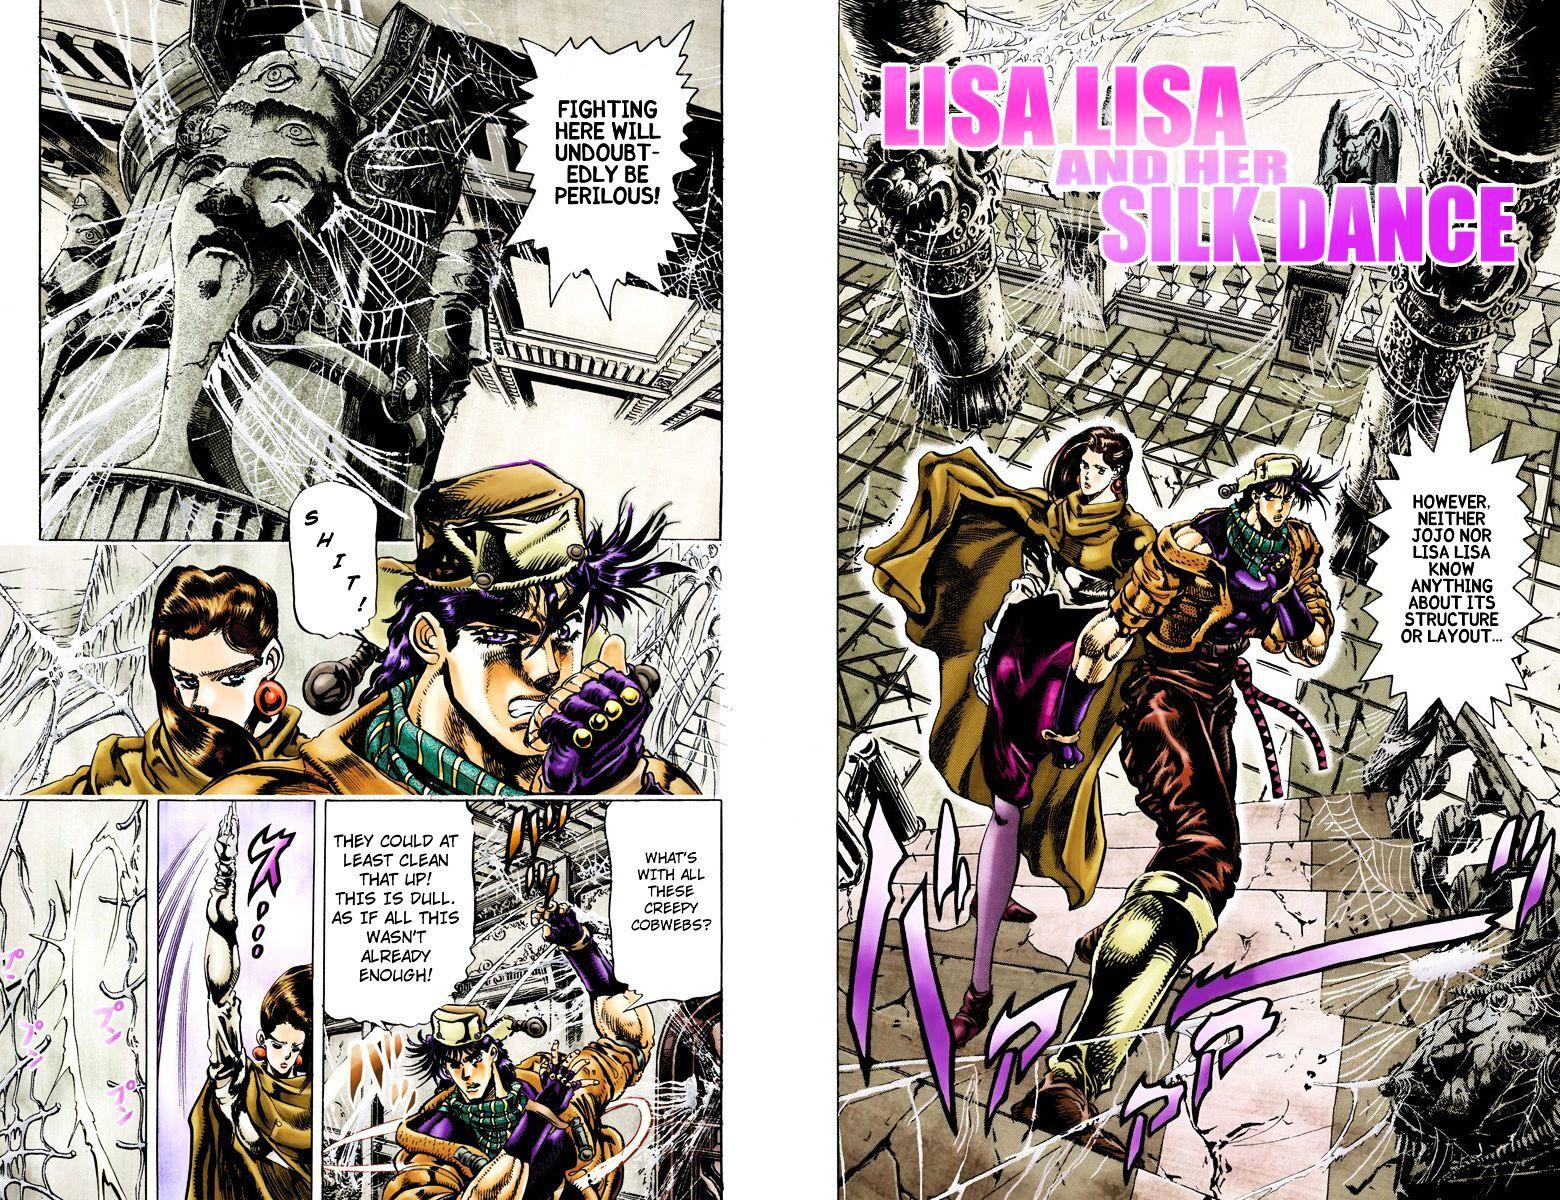 Jojo's Bizarre Adventure Vol.10 Chapter 94 : Lisa Lisa And Her Silk Dance (Official Color Scans) page 2 - 